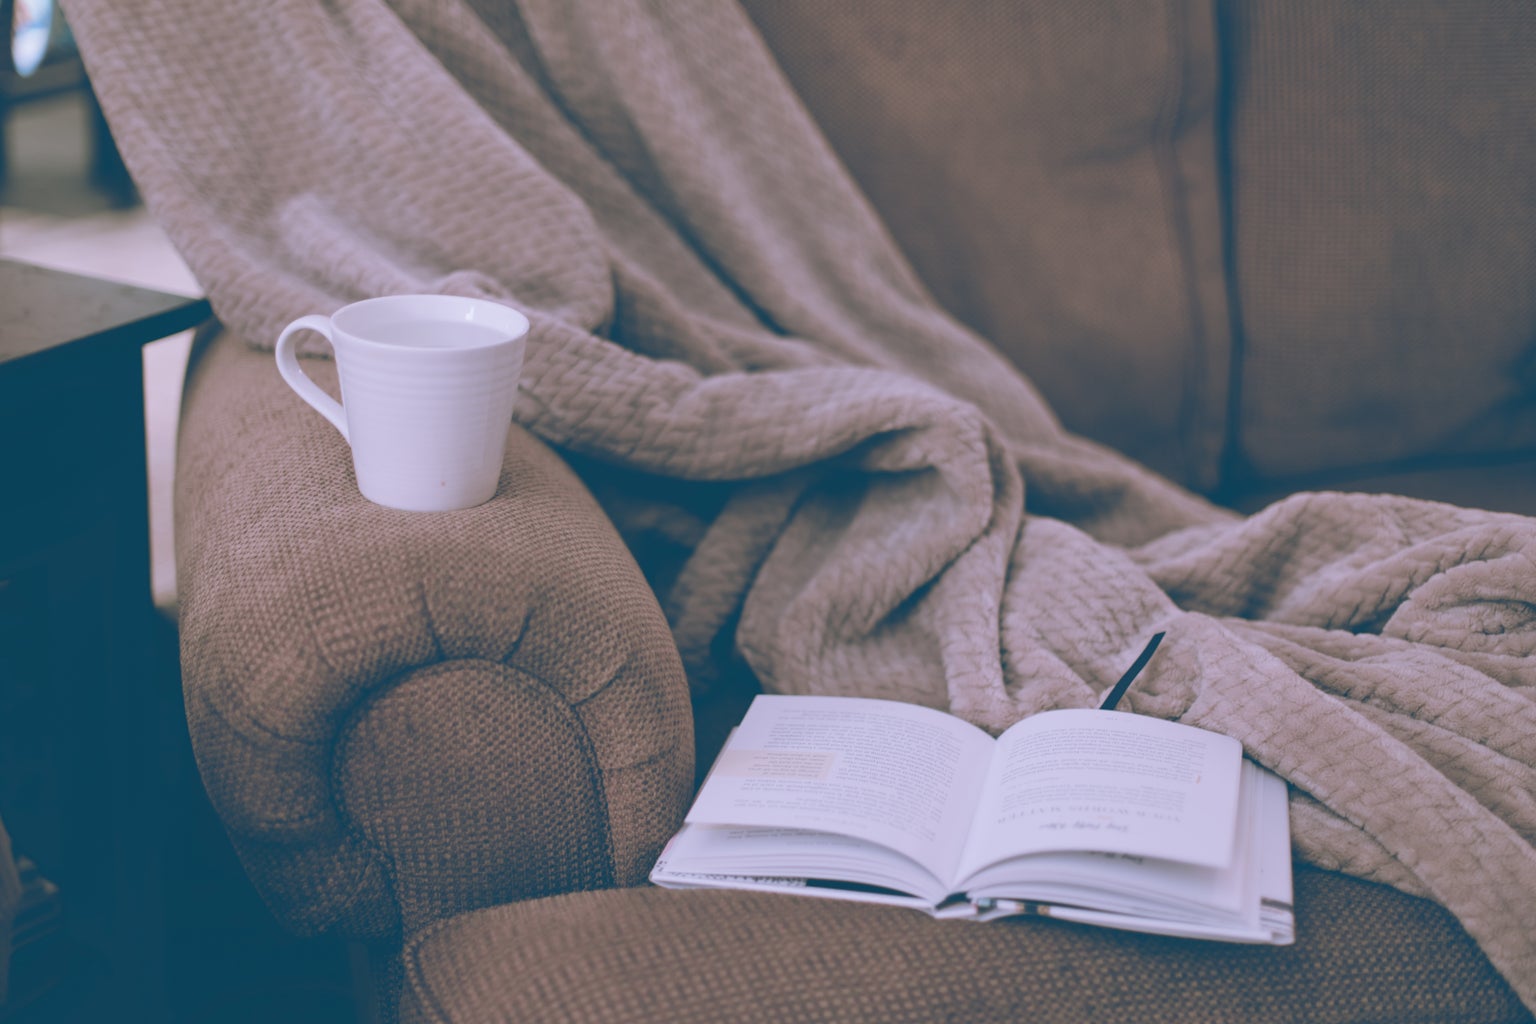 A book, a white ceramic mug and a blanket on a couch.